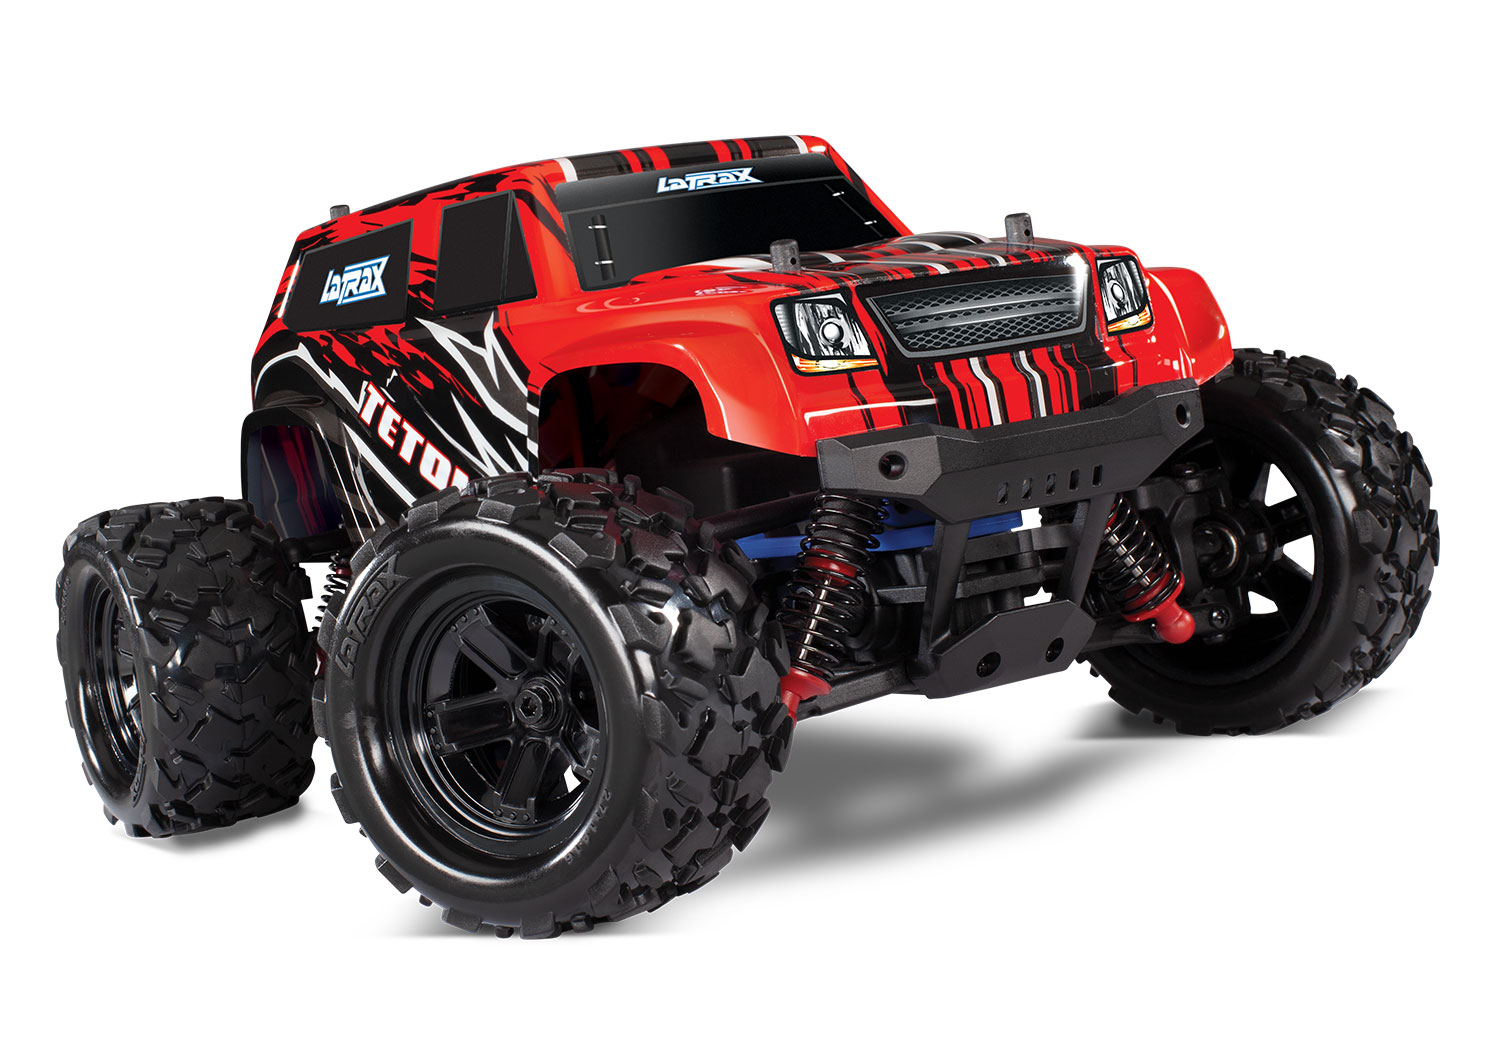 LaTrax 1/18 Scale Teton 4WD Monster Truck - Red